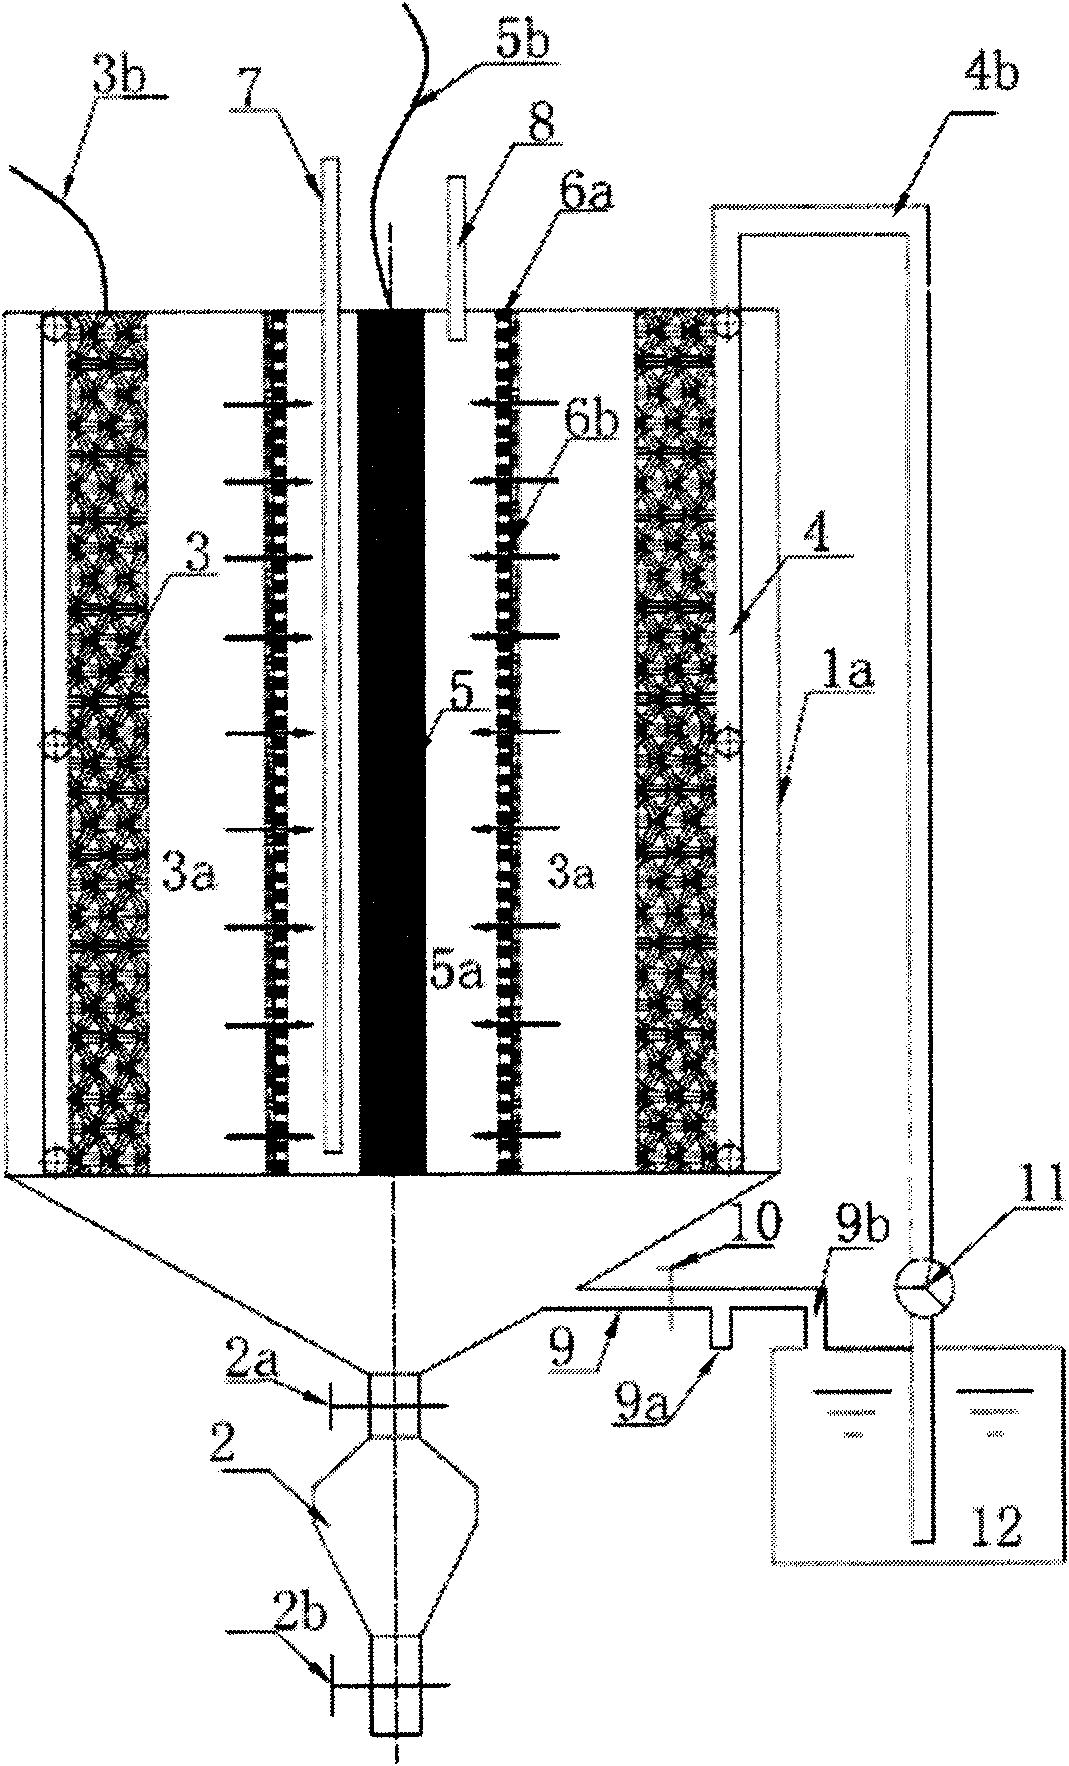 Electrolysis unit for efficiently recovering heavy metal ions